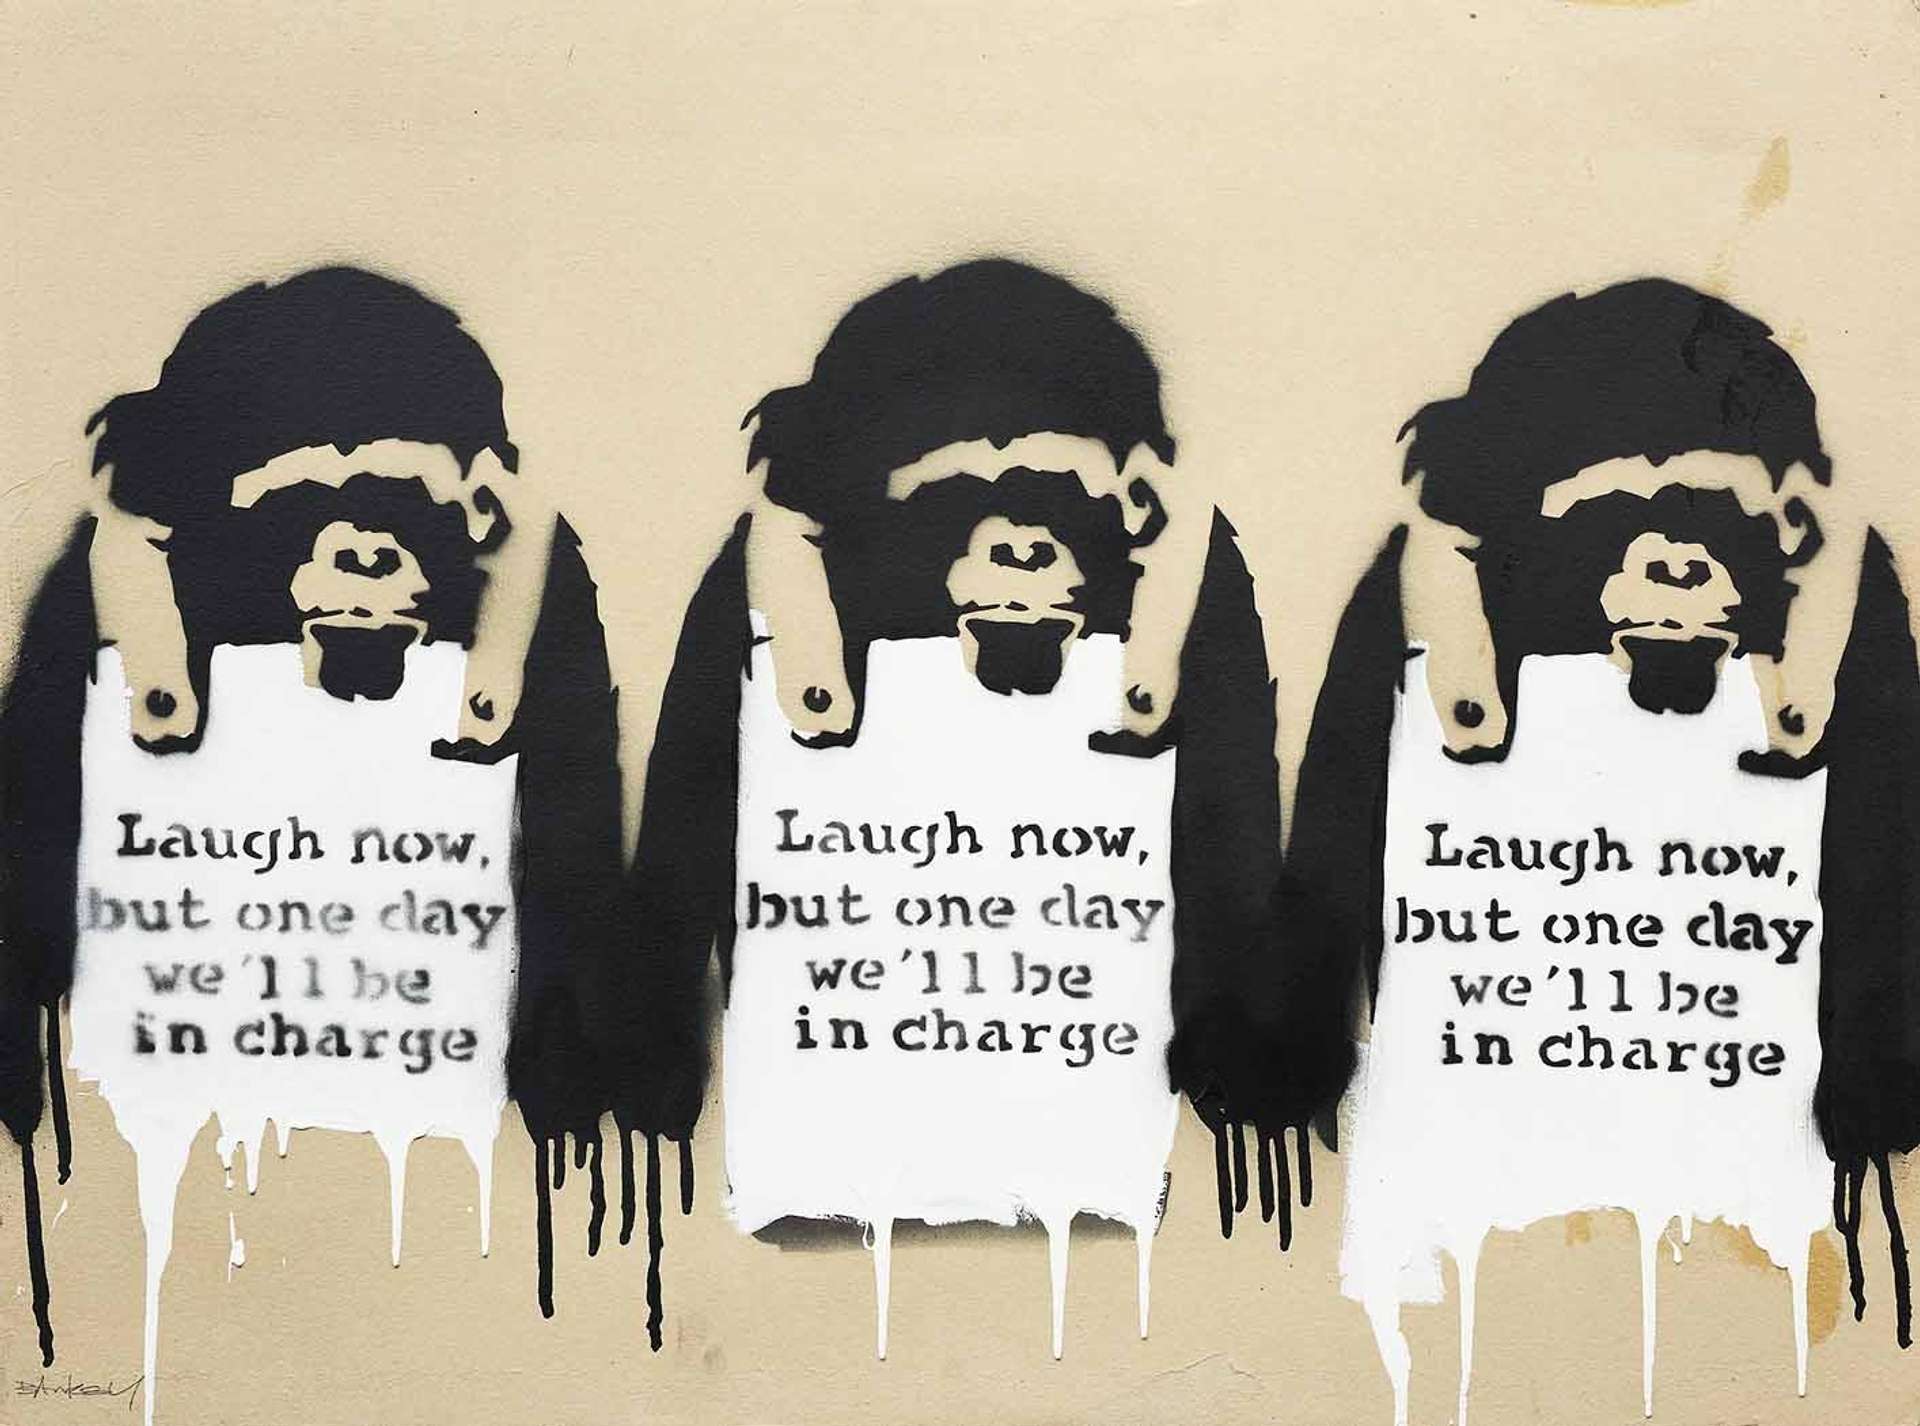 Three of Banksy’s spray painted  monkeys, wearing signs that say “Laugh Now, But One Day We’ll Be In Charge”